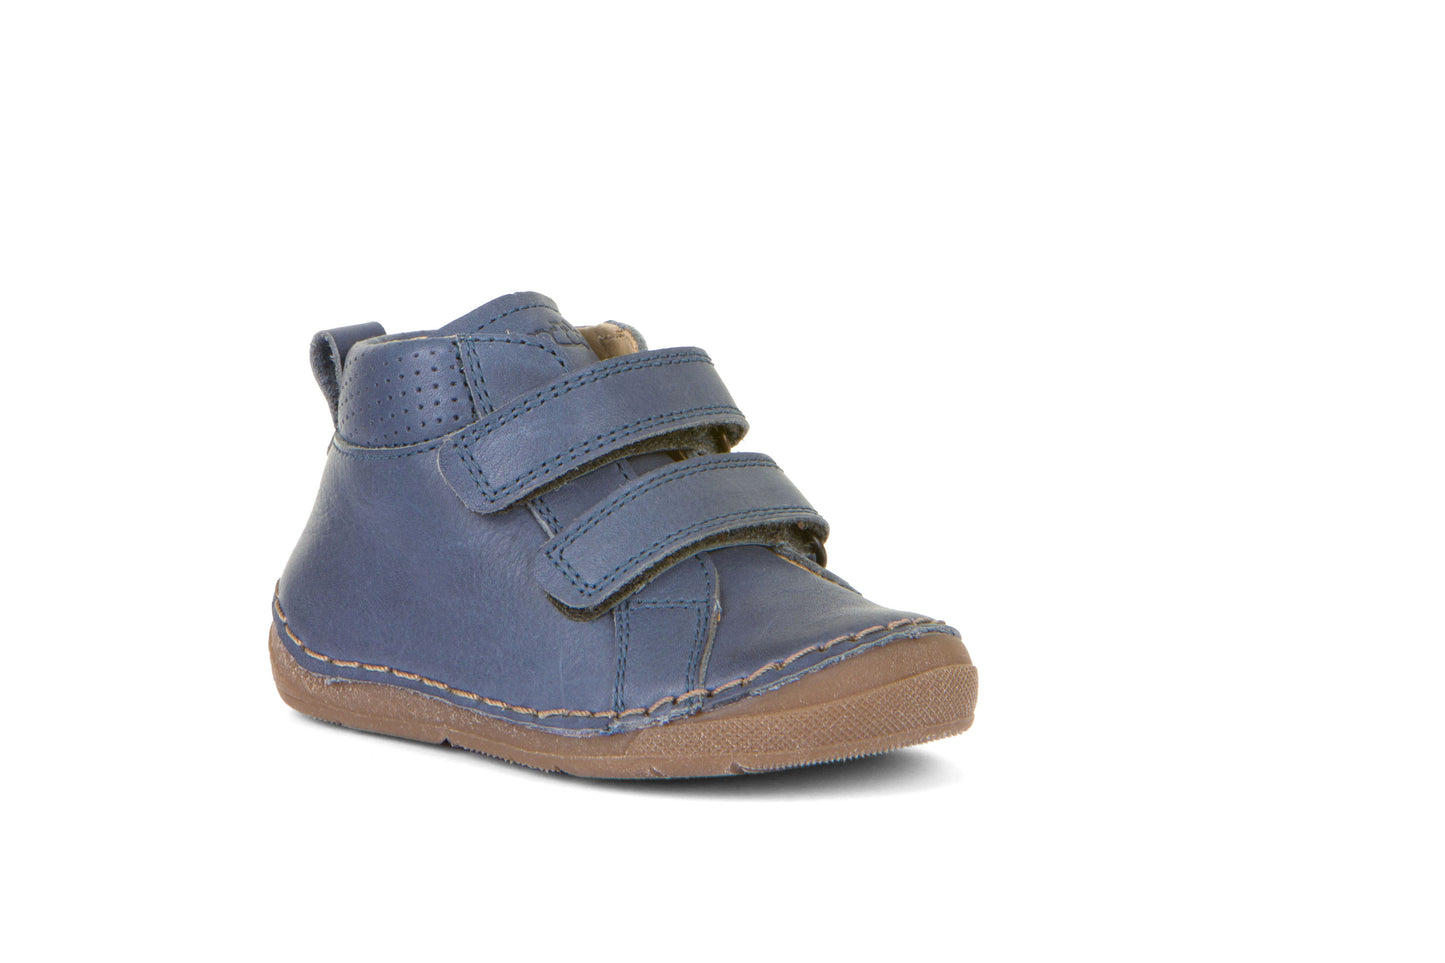 A boys boot by Froddo, style Paix Velcro G2130268-1 in Denim with double velcro fastening. Front side view.